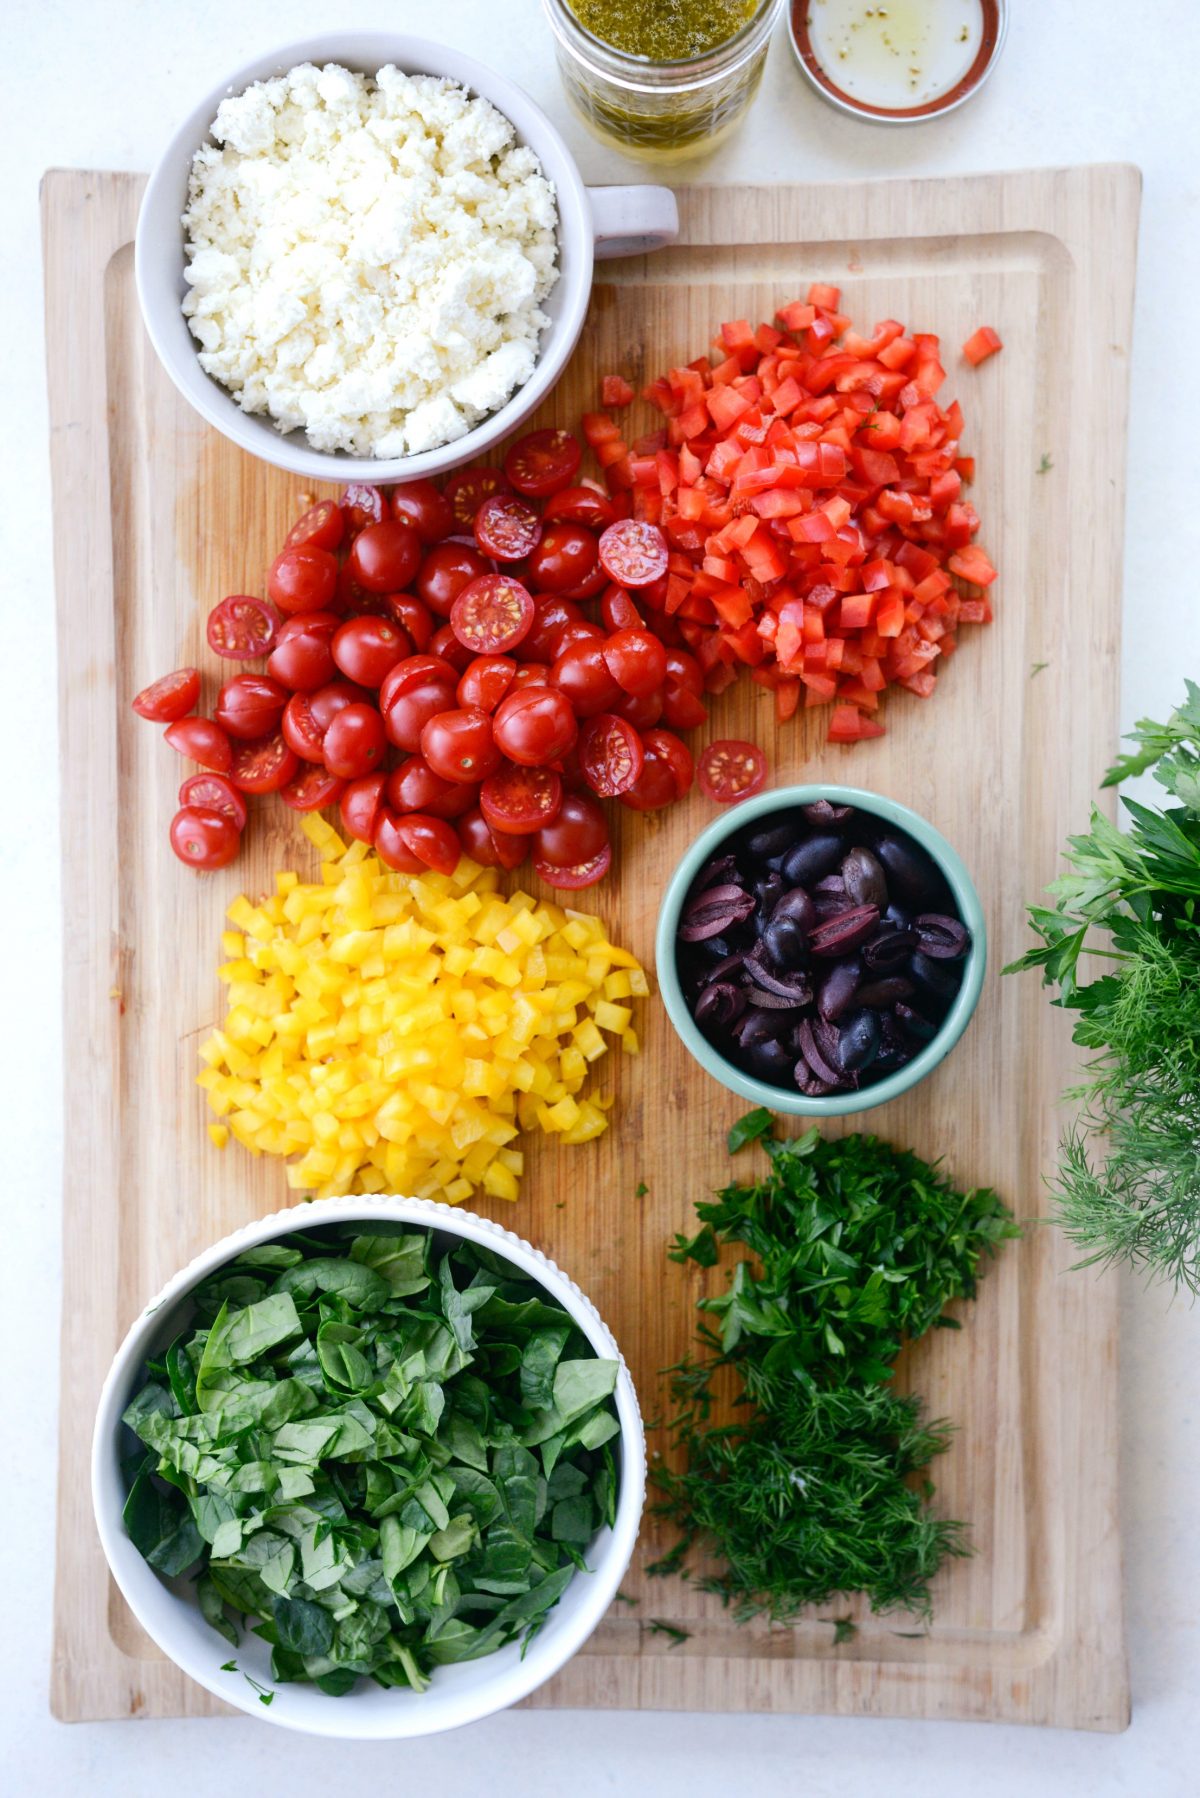 prepped salad ingredients on wood cutting board.